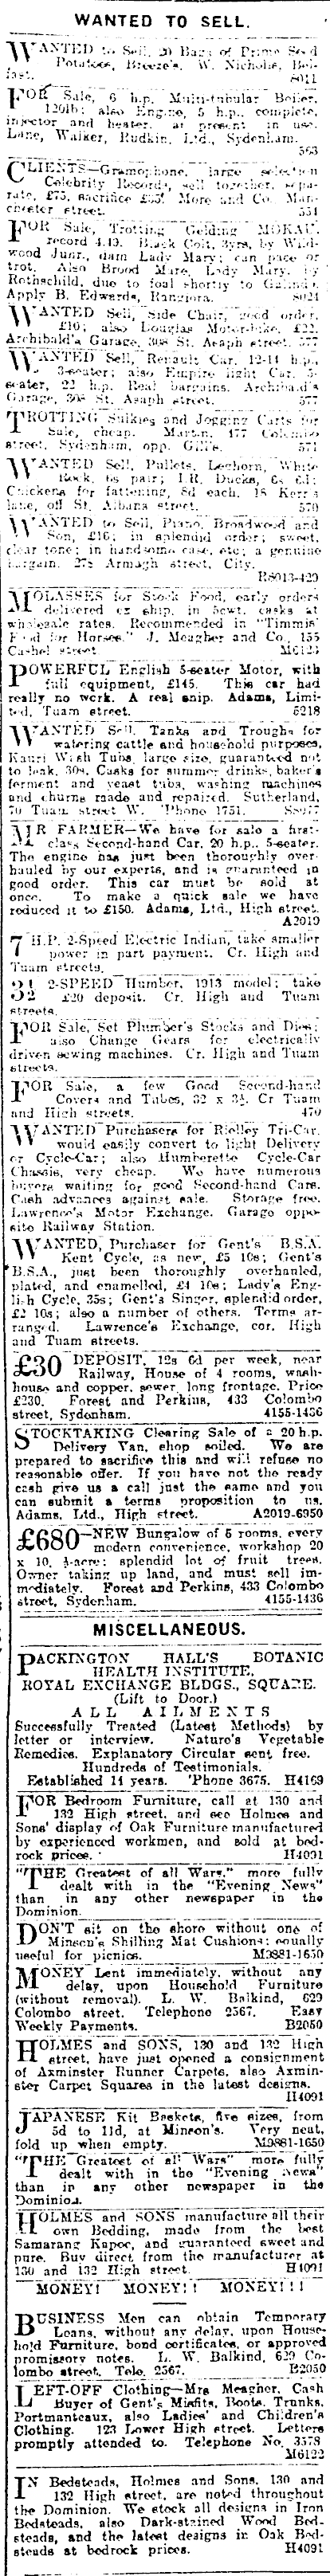 Papers Past Newspapers Press 9 November 1915 Page 11 Advertisements Column 2